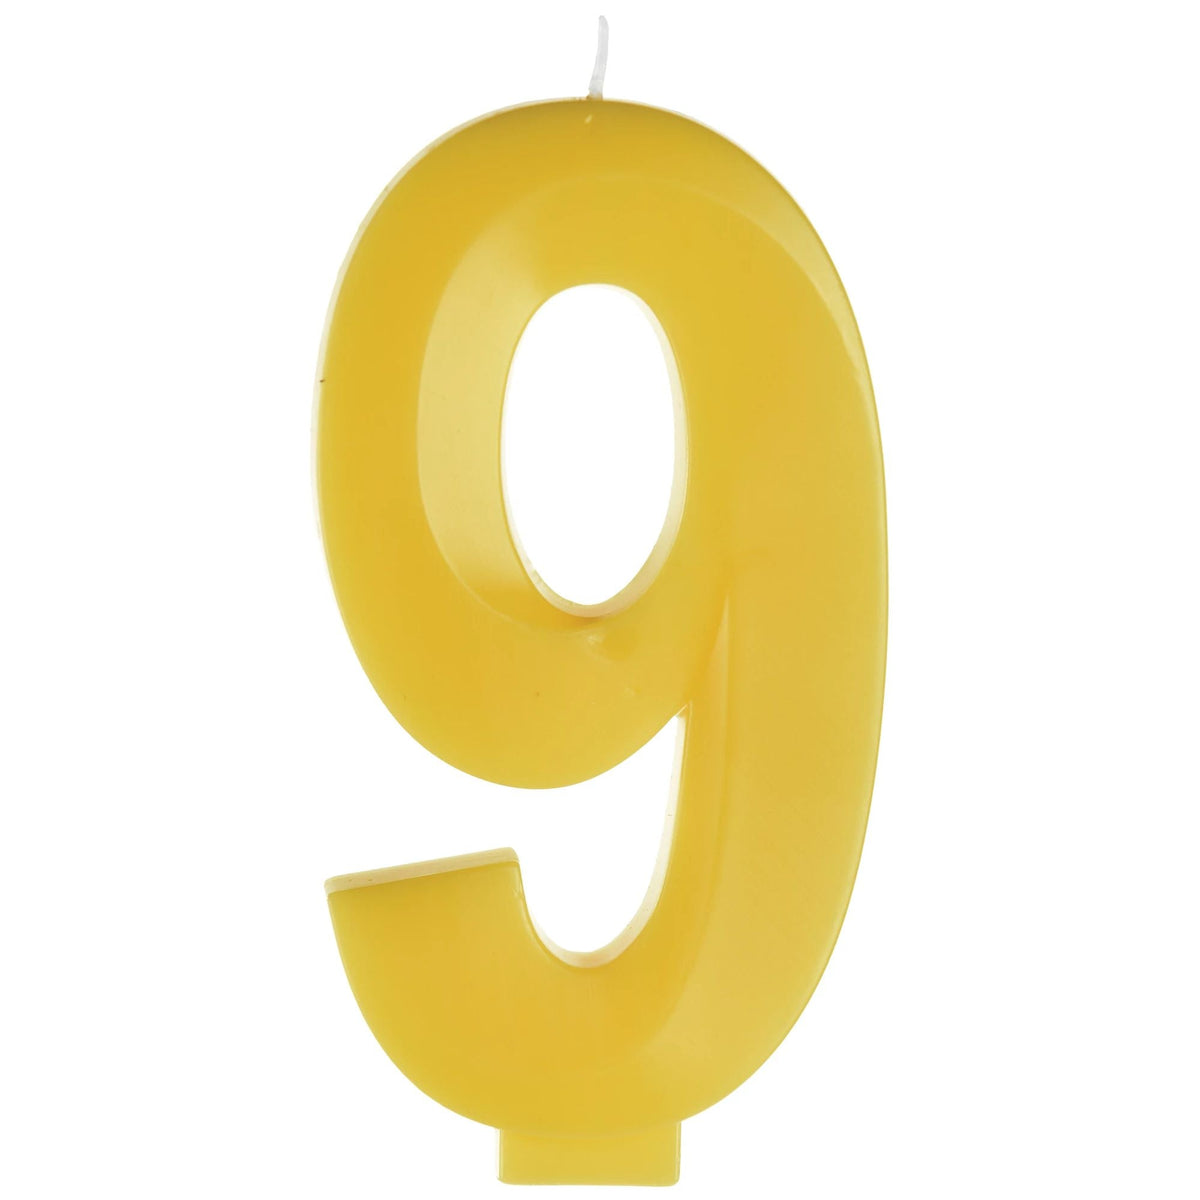 AMSCAN CA Cake Supplies Yellow Number 9 Birthday Facet Candle, 1 Count 192937383810